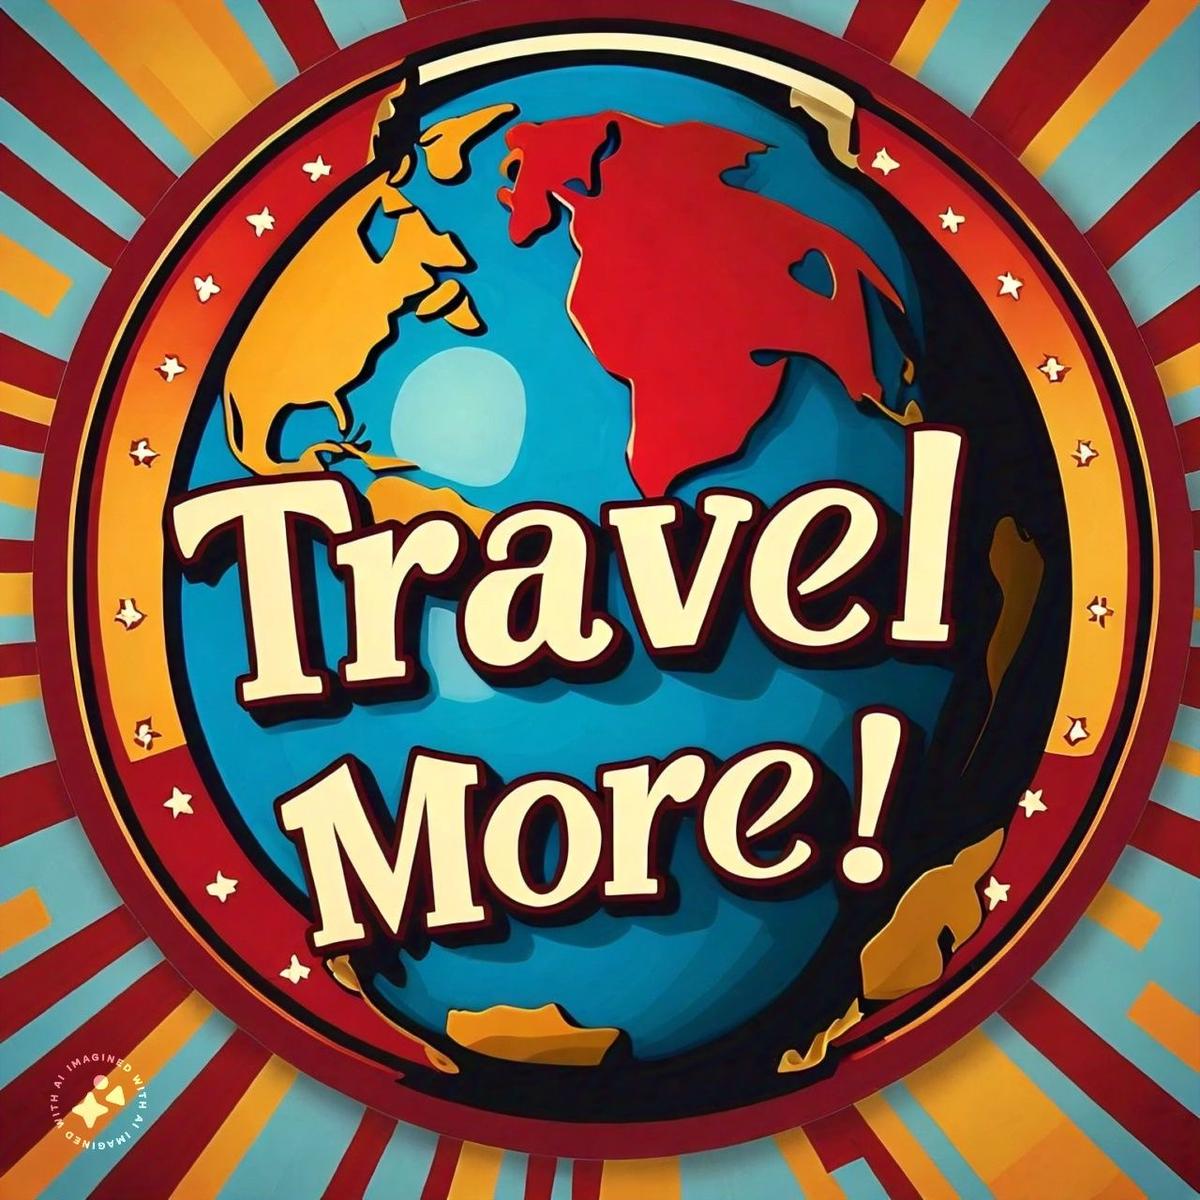 Travel More!'s images